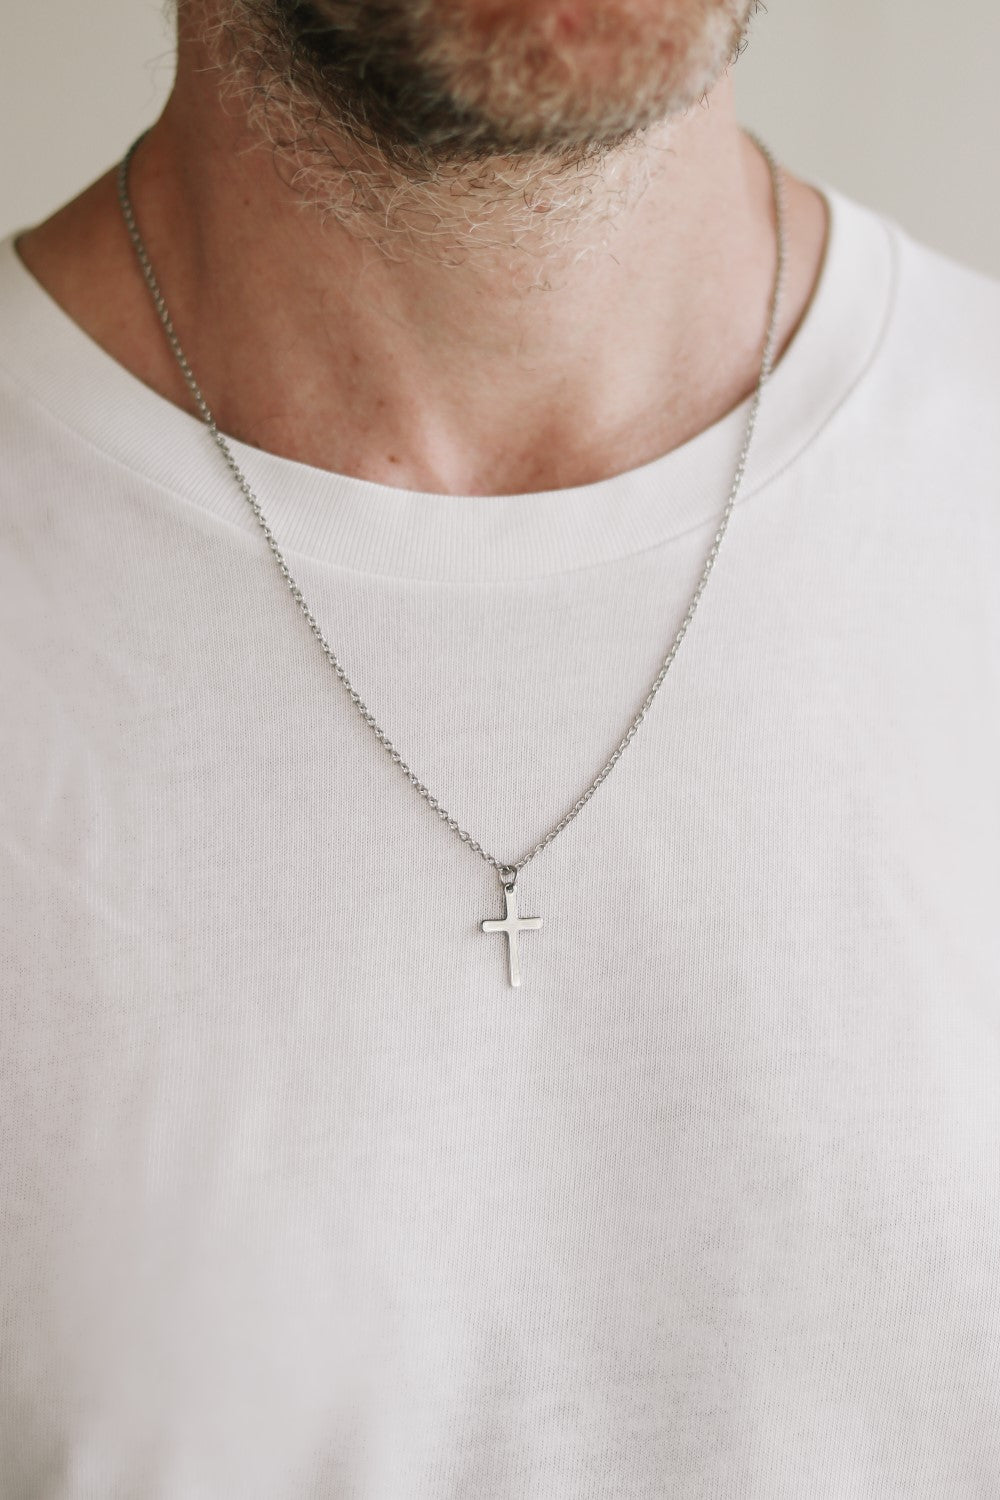 Cross Necklace for Men, Groomsmen Gift, Mens Necklace Stainless Steel Cross  Pendant, Silver Chain, Gift for Him, Christian Catholic Necklace - Etsy |  Cross necklace, Stainless steel cross pendant, Men's necklace